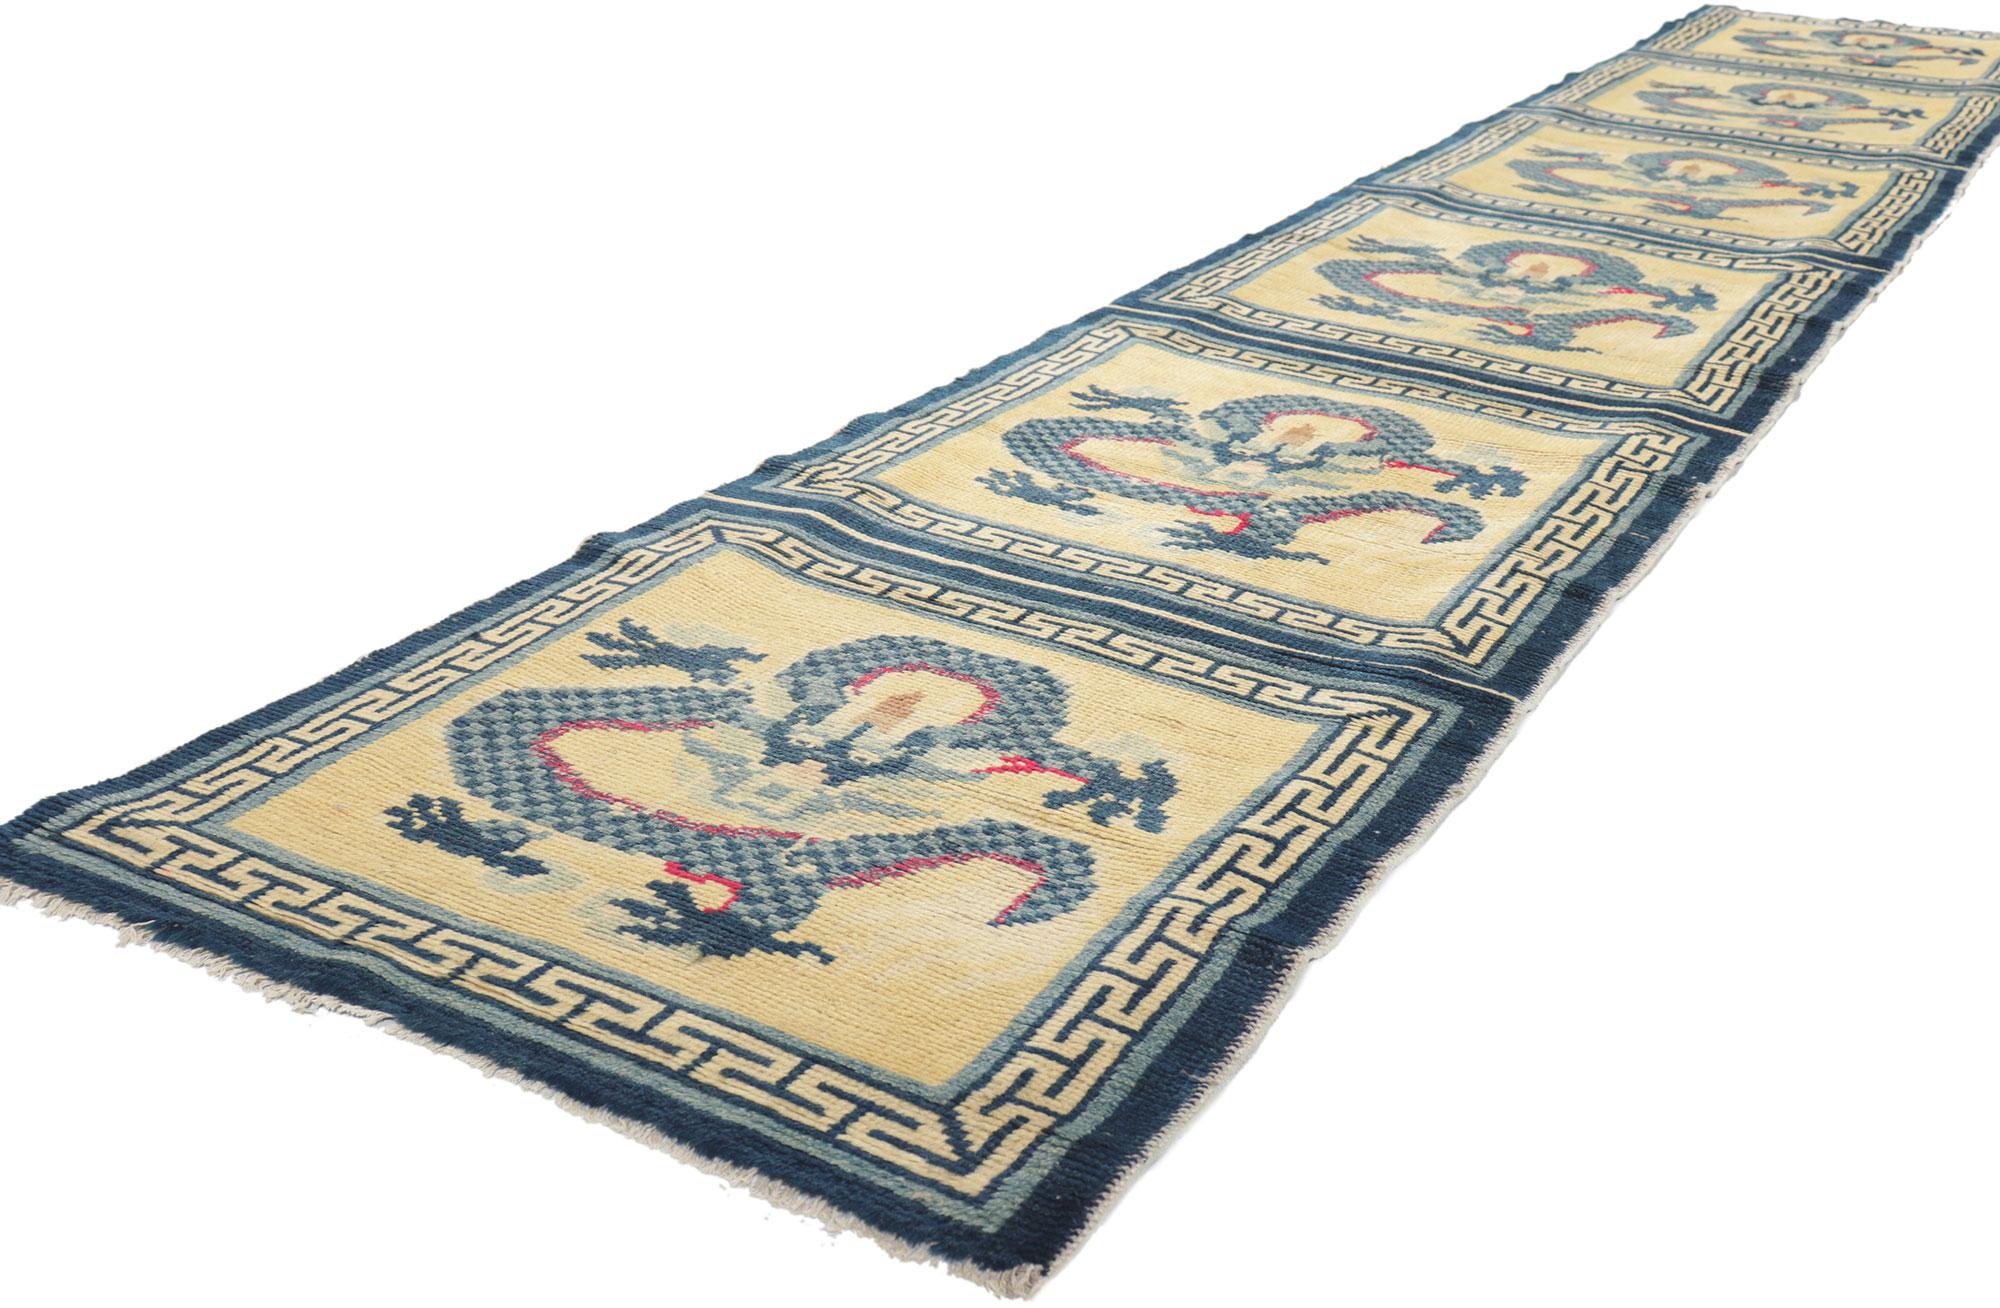 78455 Antique Chinese Ningxia Bench runner Meditation Mat, 02'01 x 13'01. Emanating mythical elements with incredible detail and texture, this hand knotted wool antique Chinese Ningxia bench runner is a captivating vision of woven beauty. The dragon